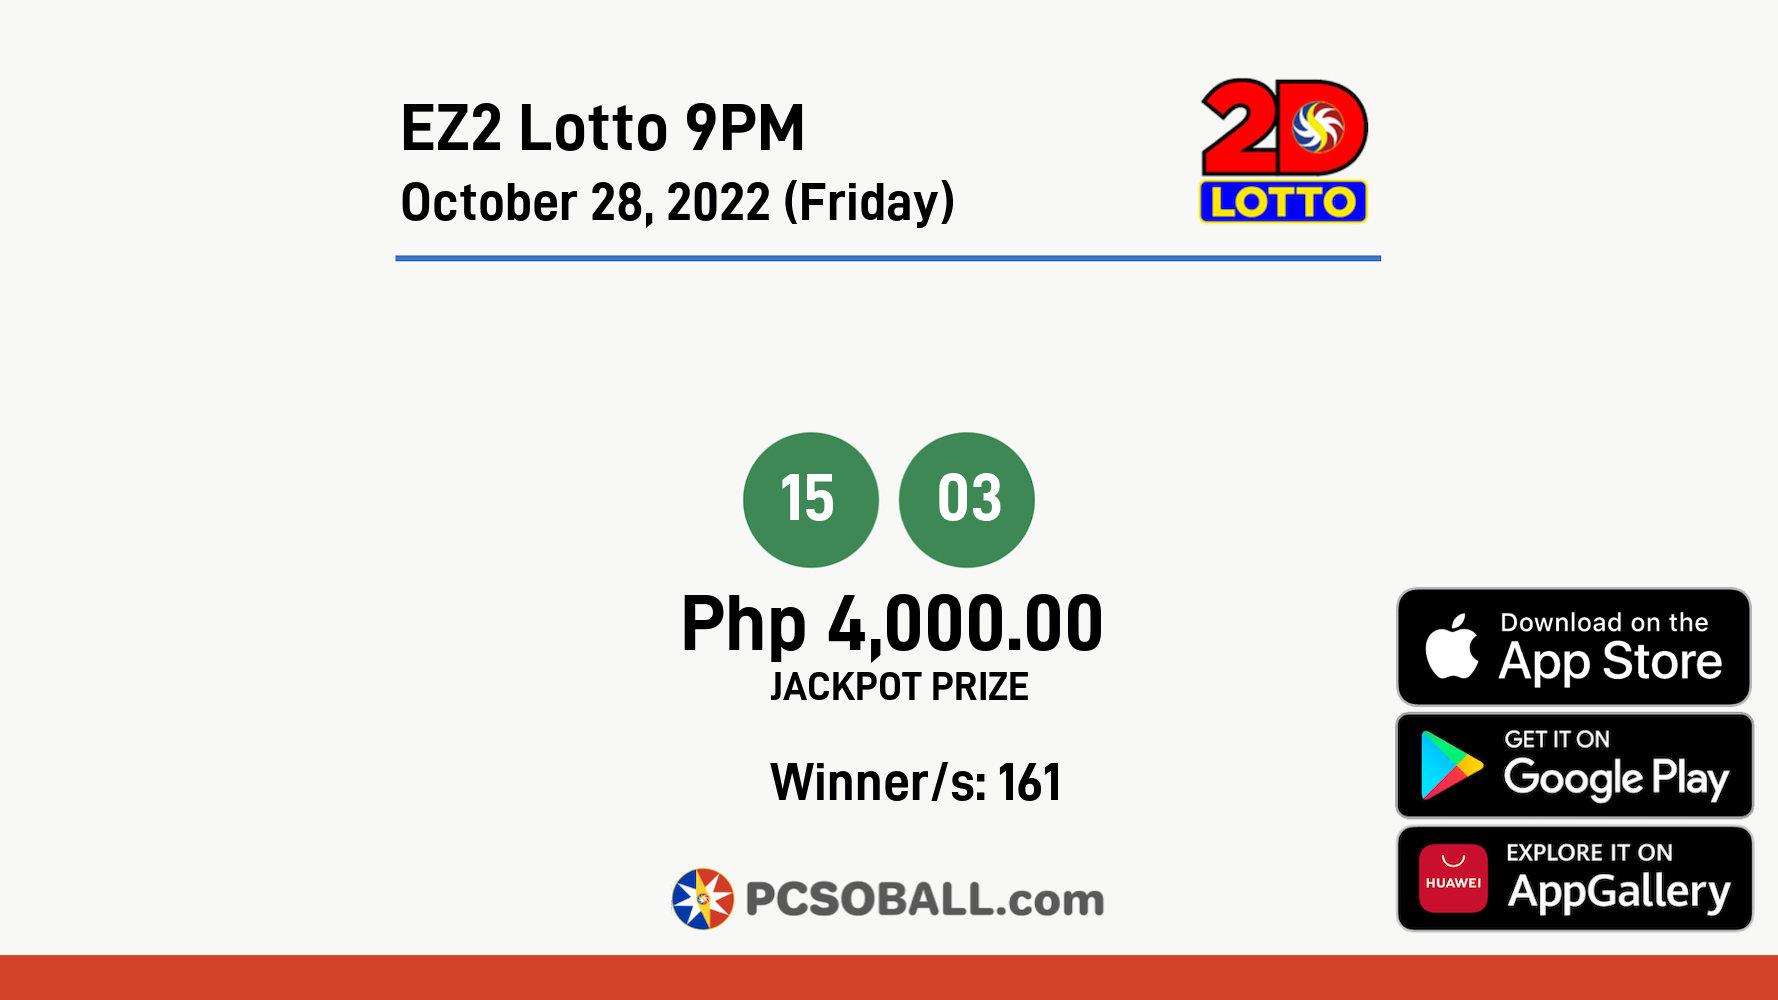 EZ2 Lotto 9PM October 28, 2022 (Friday) Result